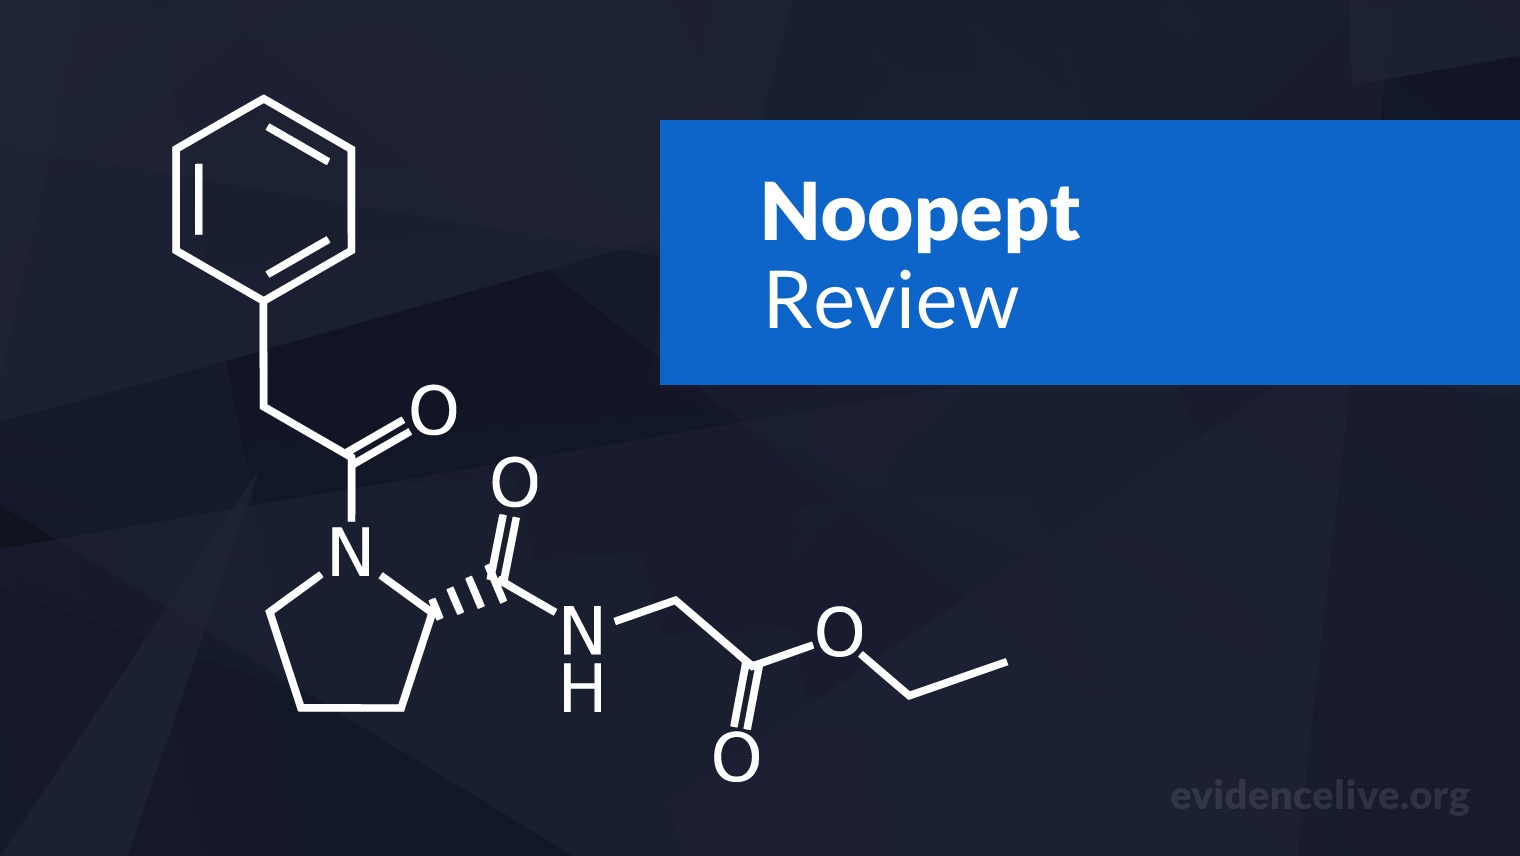 Noopept Review: Benefits, Dosage, and Side Effects